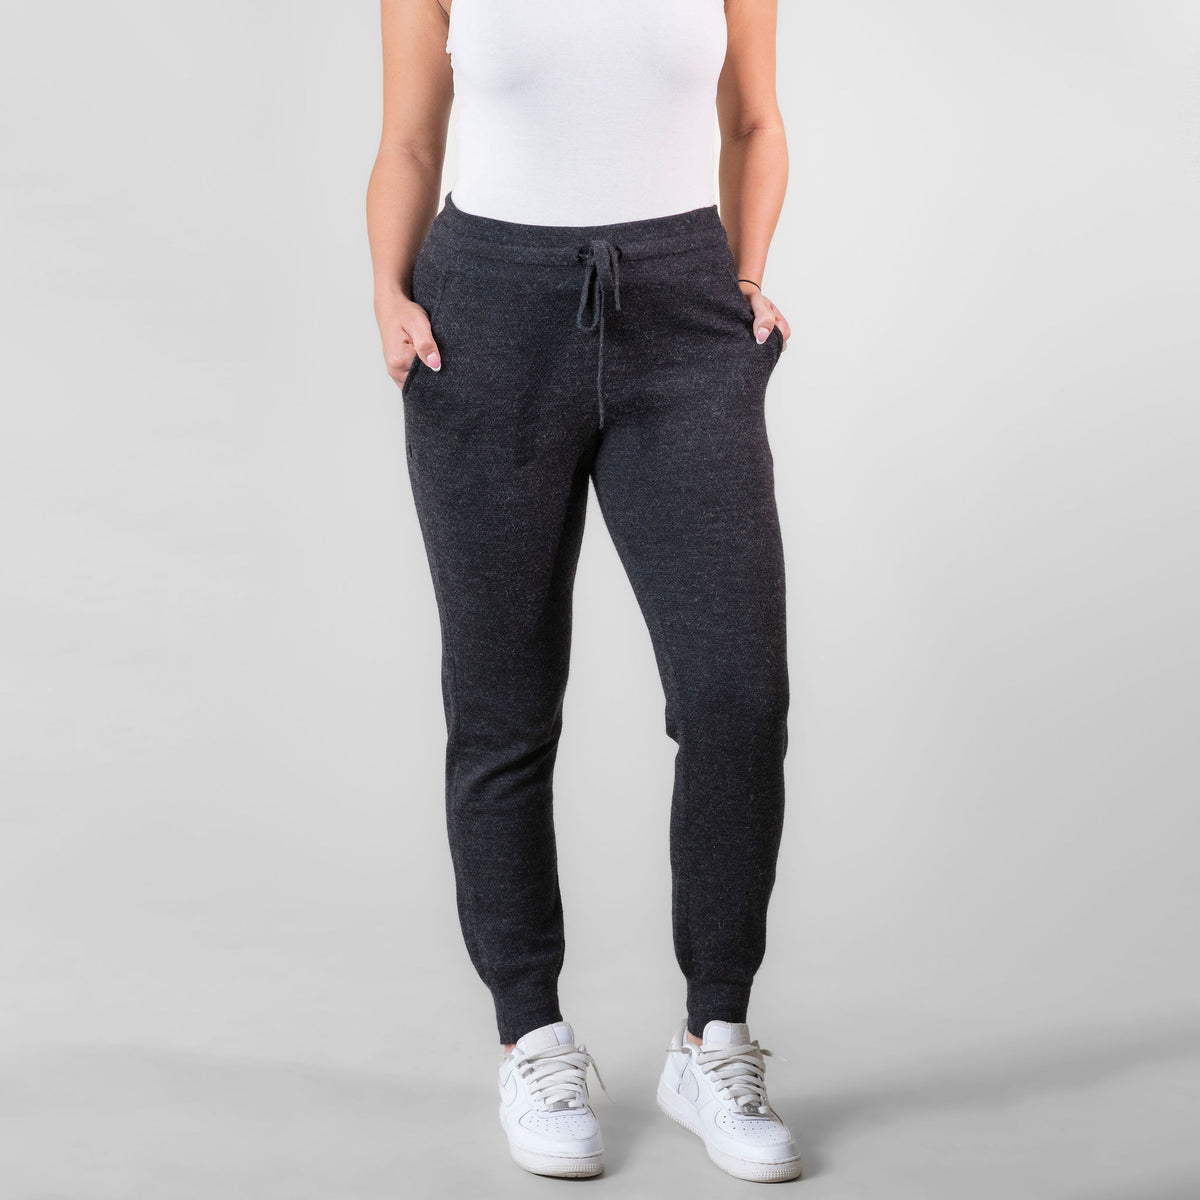 Cozy and Casual: Charcoal Beanie, White T-Shirt, Grey Sweatpants